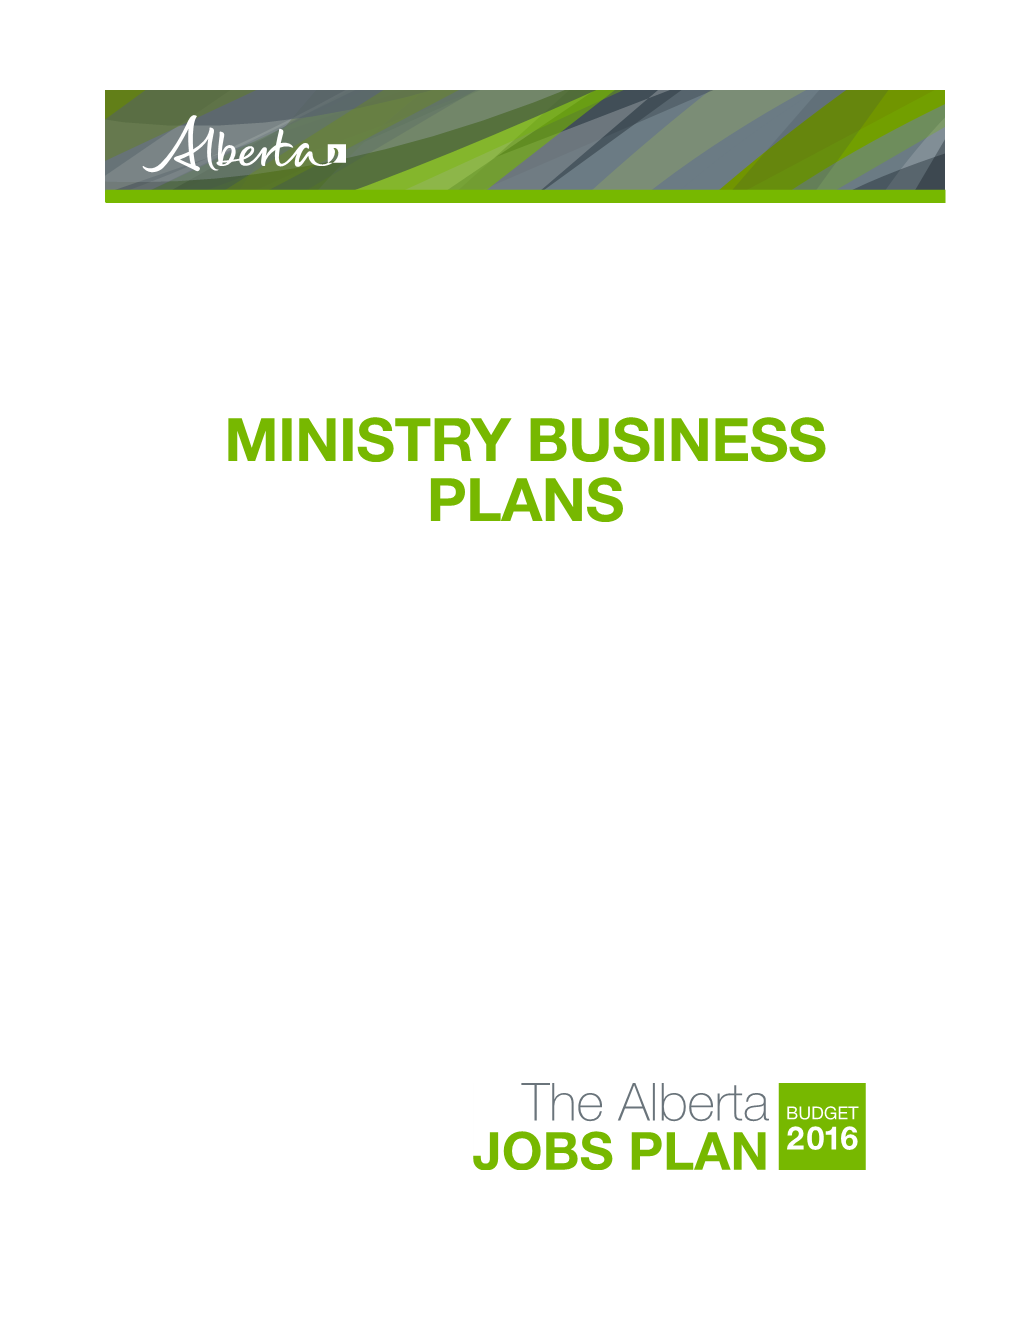 MINISTRY BUSINESS PLANS Treasury Board and Finance